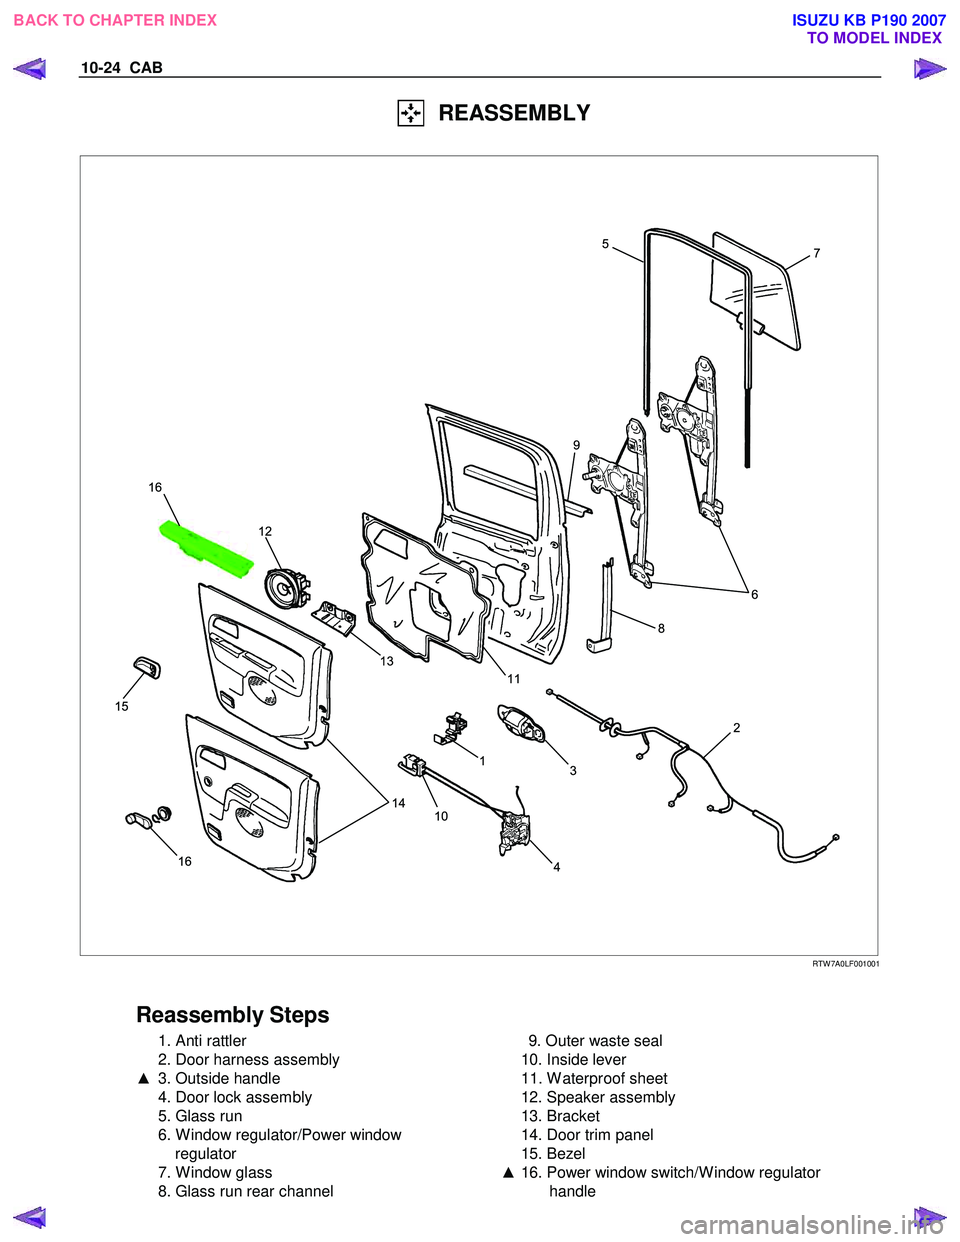 ISUZU KB P190 2007  Workshop Repair Manual 10-24  CAB 
   REASSEMBLY 
 
  
 
7
6
2
3
1
10 4
14
13
11
12
16
15
8
9 5
16
 
 RTW 7A0LF001001 
  
 
Reassembly Steps 
  1. Anti rattler  
  2. Door harness assembly 
▲   3. Outside handle 
  4. Doo